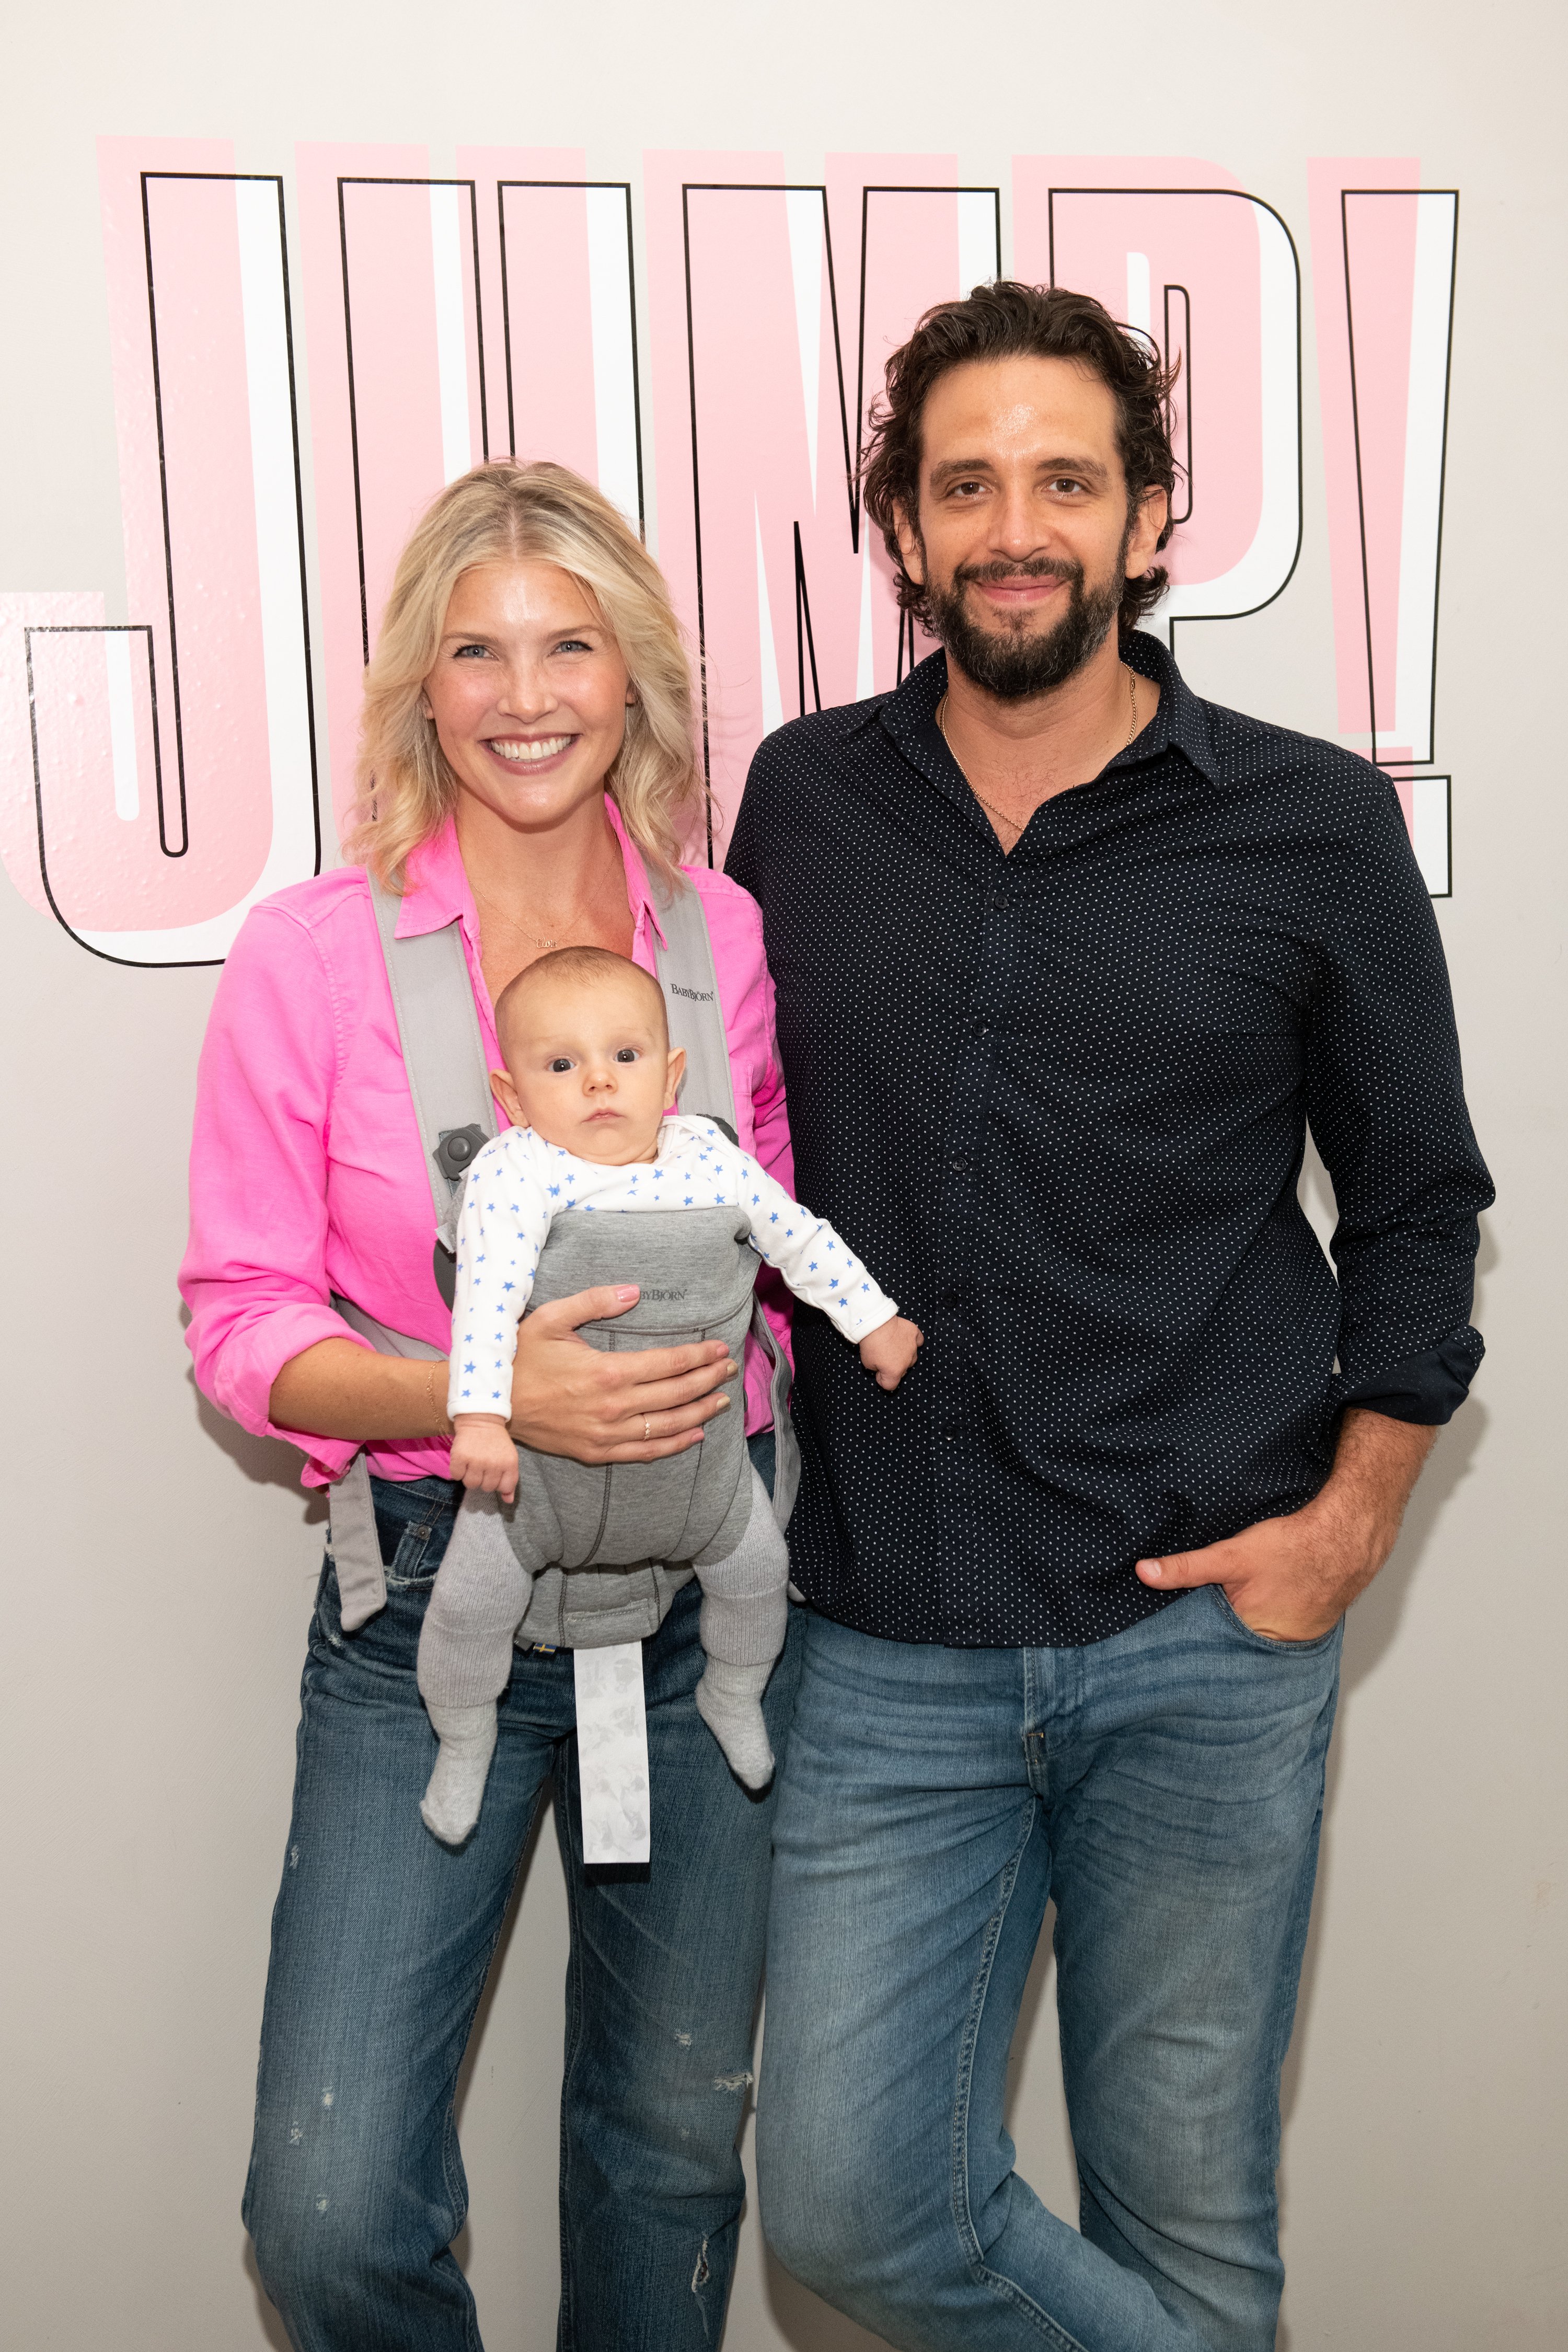 Amanda Kloots, Nick Cordero and their son, Elvis at an event in New York in August 2019. | Photo: Getty Images.